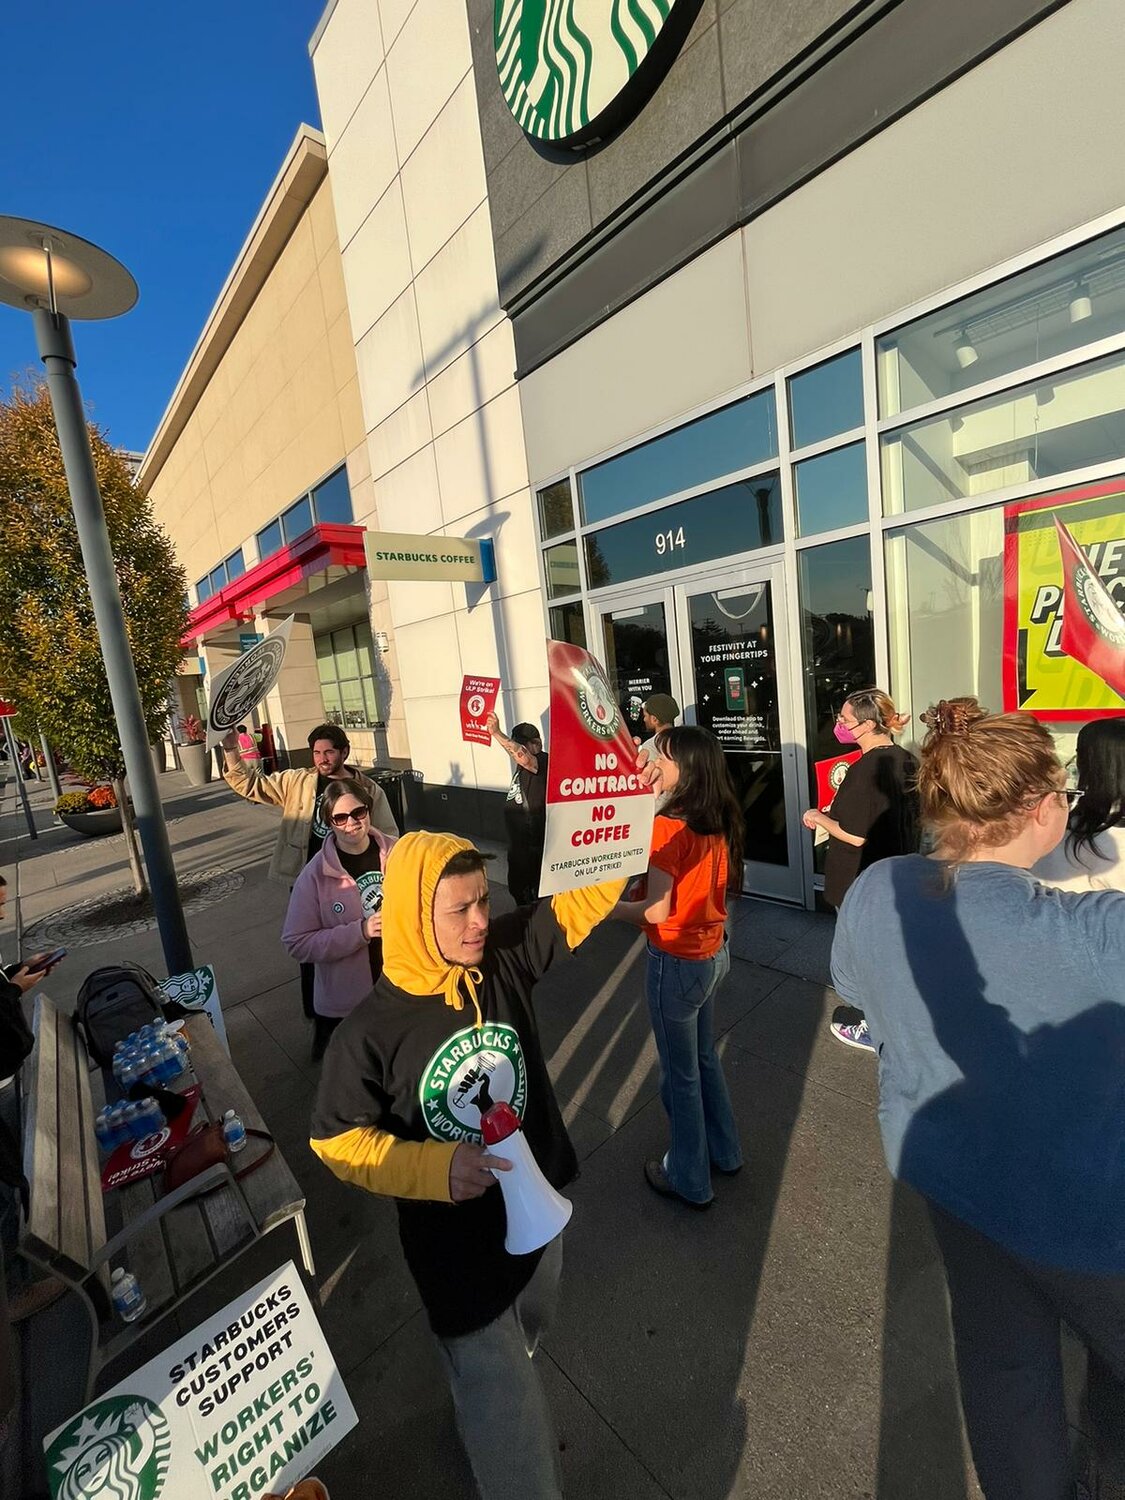 Anthony Price, a Uniondale resident who says he was fired from his job at a Westbury Starbucks after a confrontation with his manager, claims he’s actually being targeted because of his outspoken leadership in Workers United, the store’s union. Price led a number strikes in the months leading up to his firing.